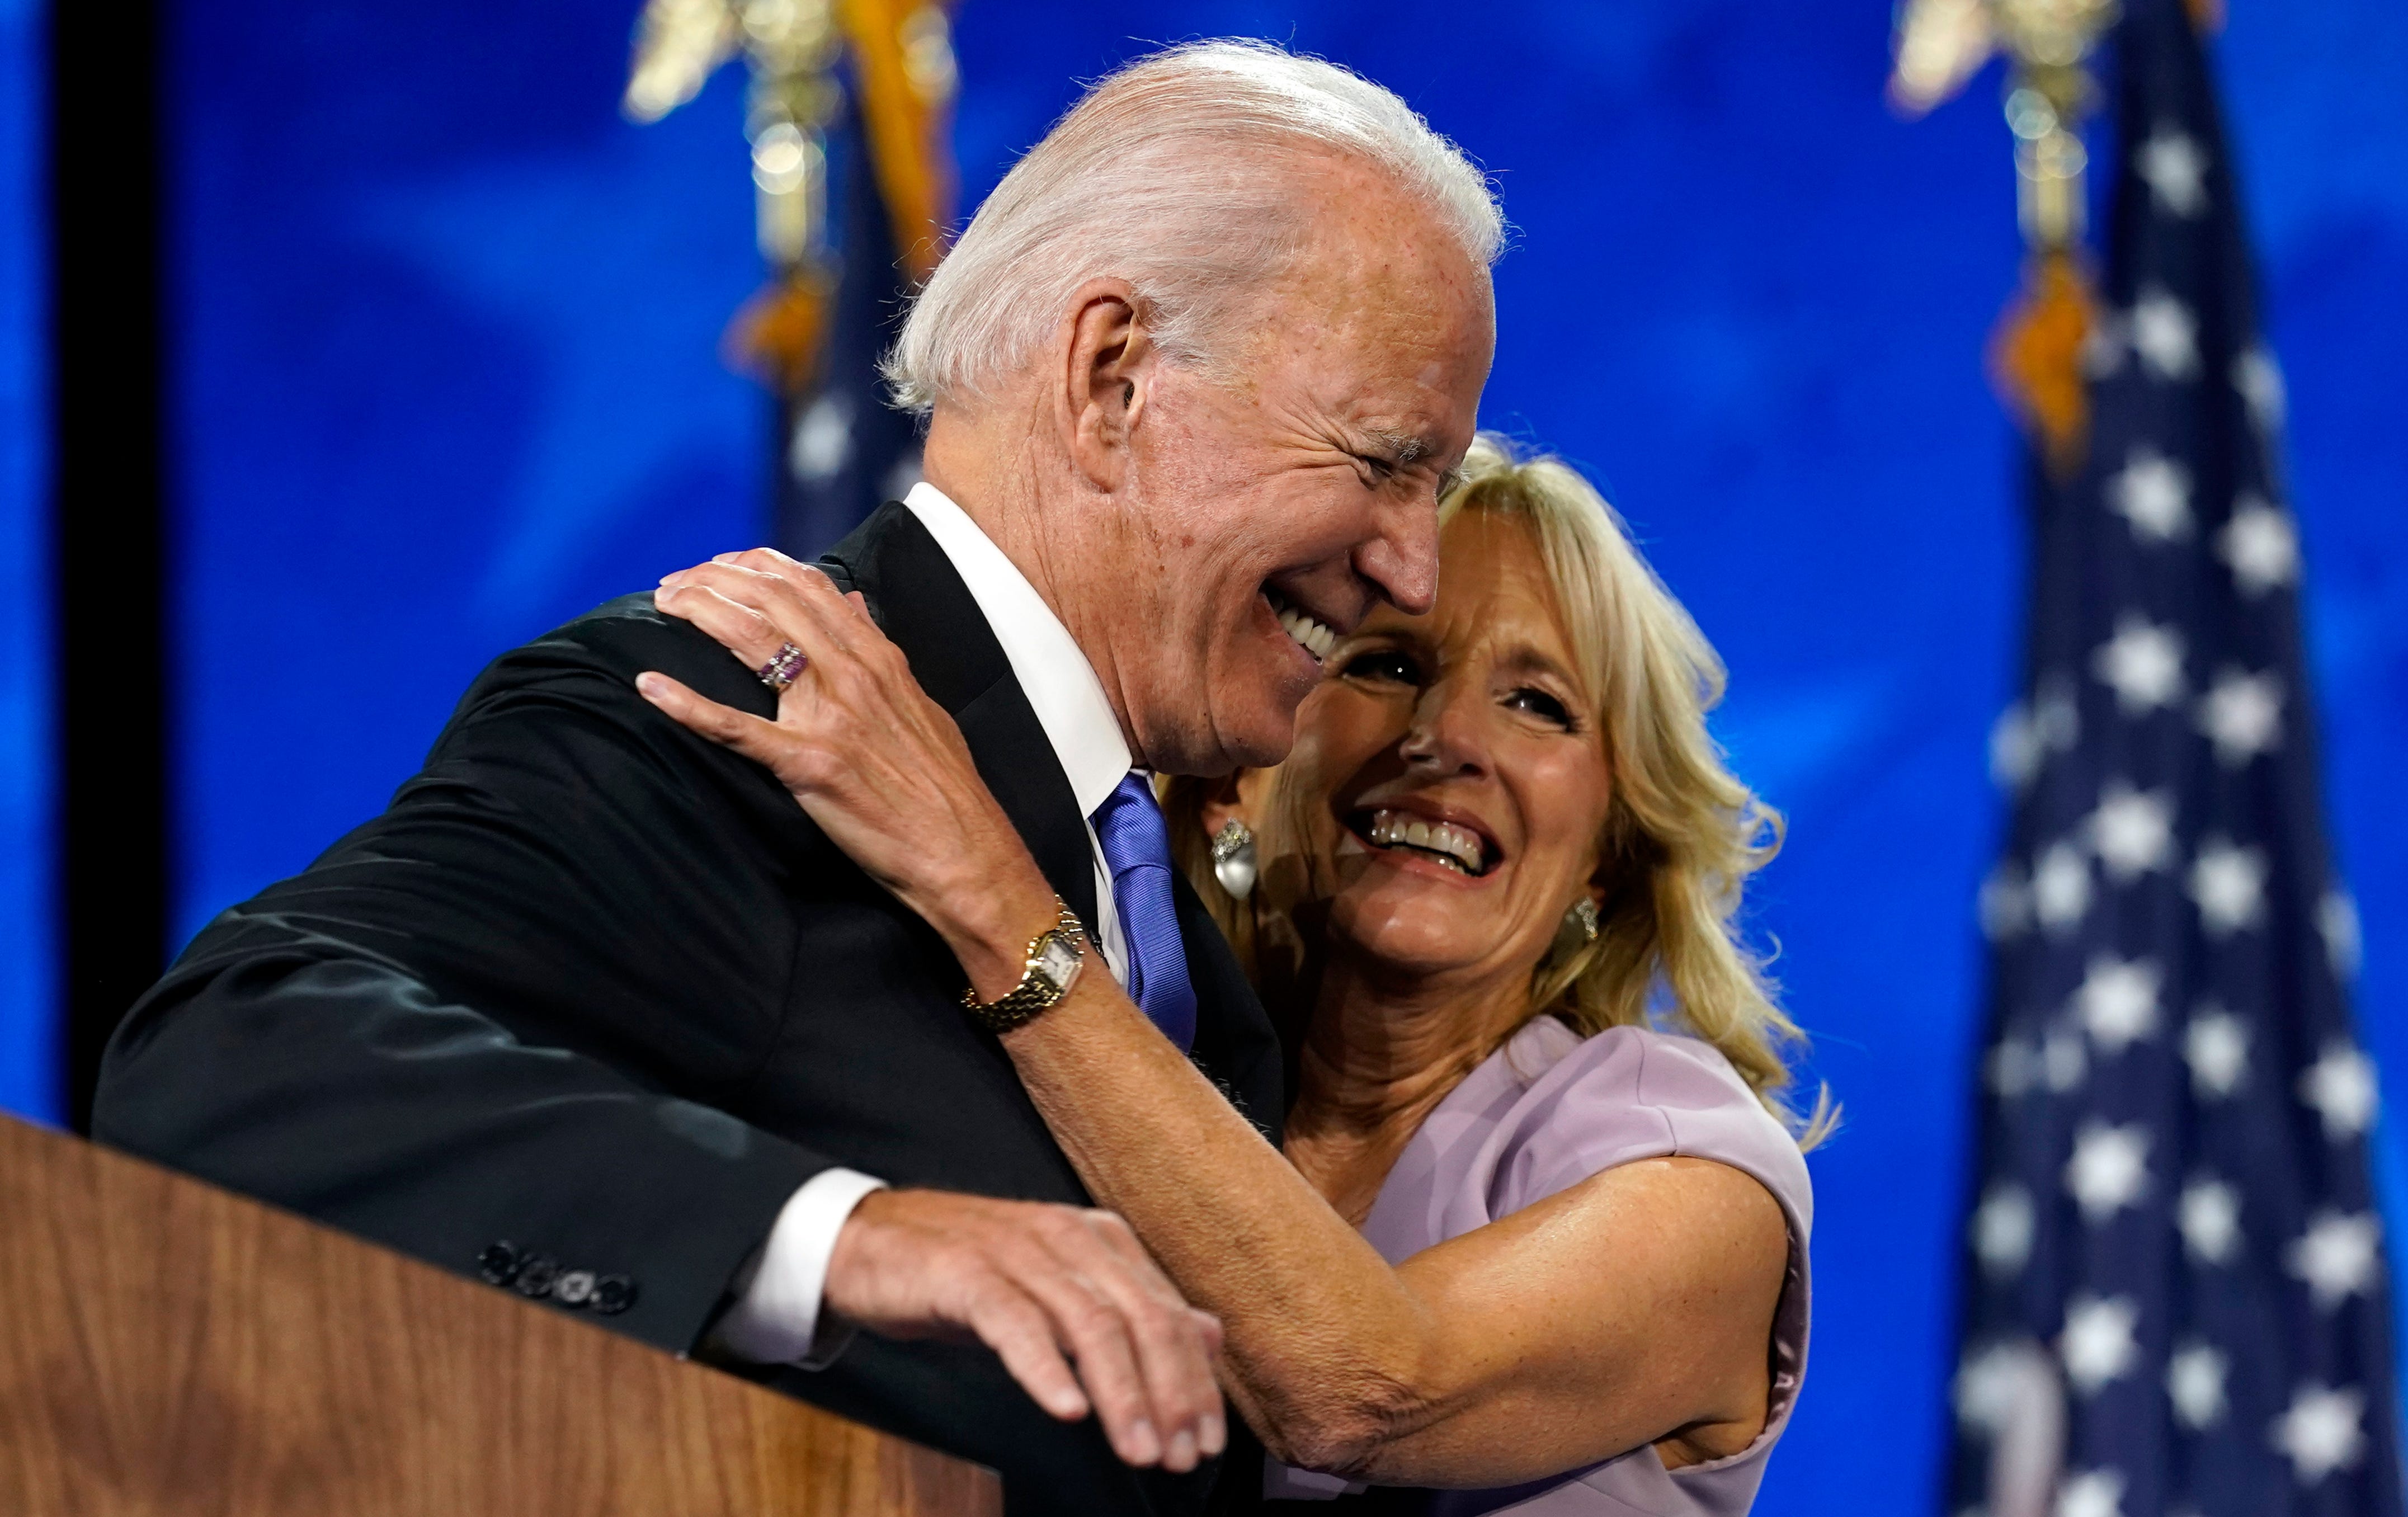 Democratic presidential candidate former Vice President Joe Biden hugs his wife Jill Biden after his speech during the fourth day of the Democratic National Convention, Thursday, Aug. 20, 2020, at the Chase Center in Wilmington, Del.